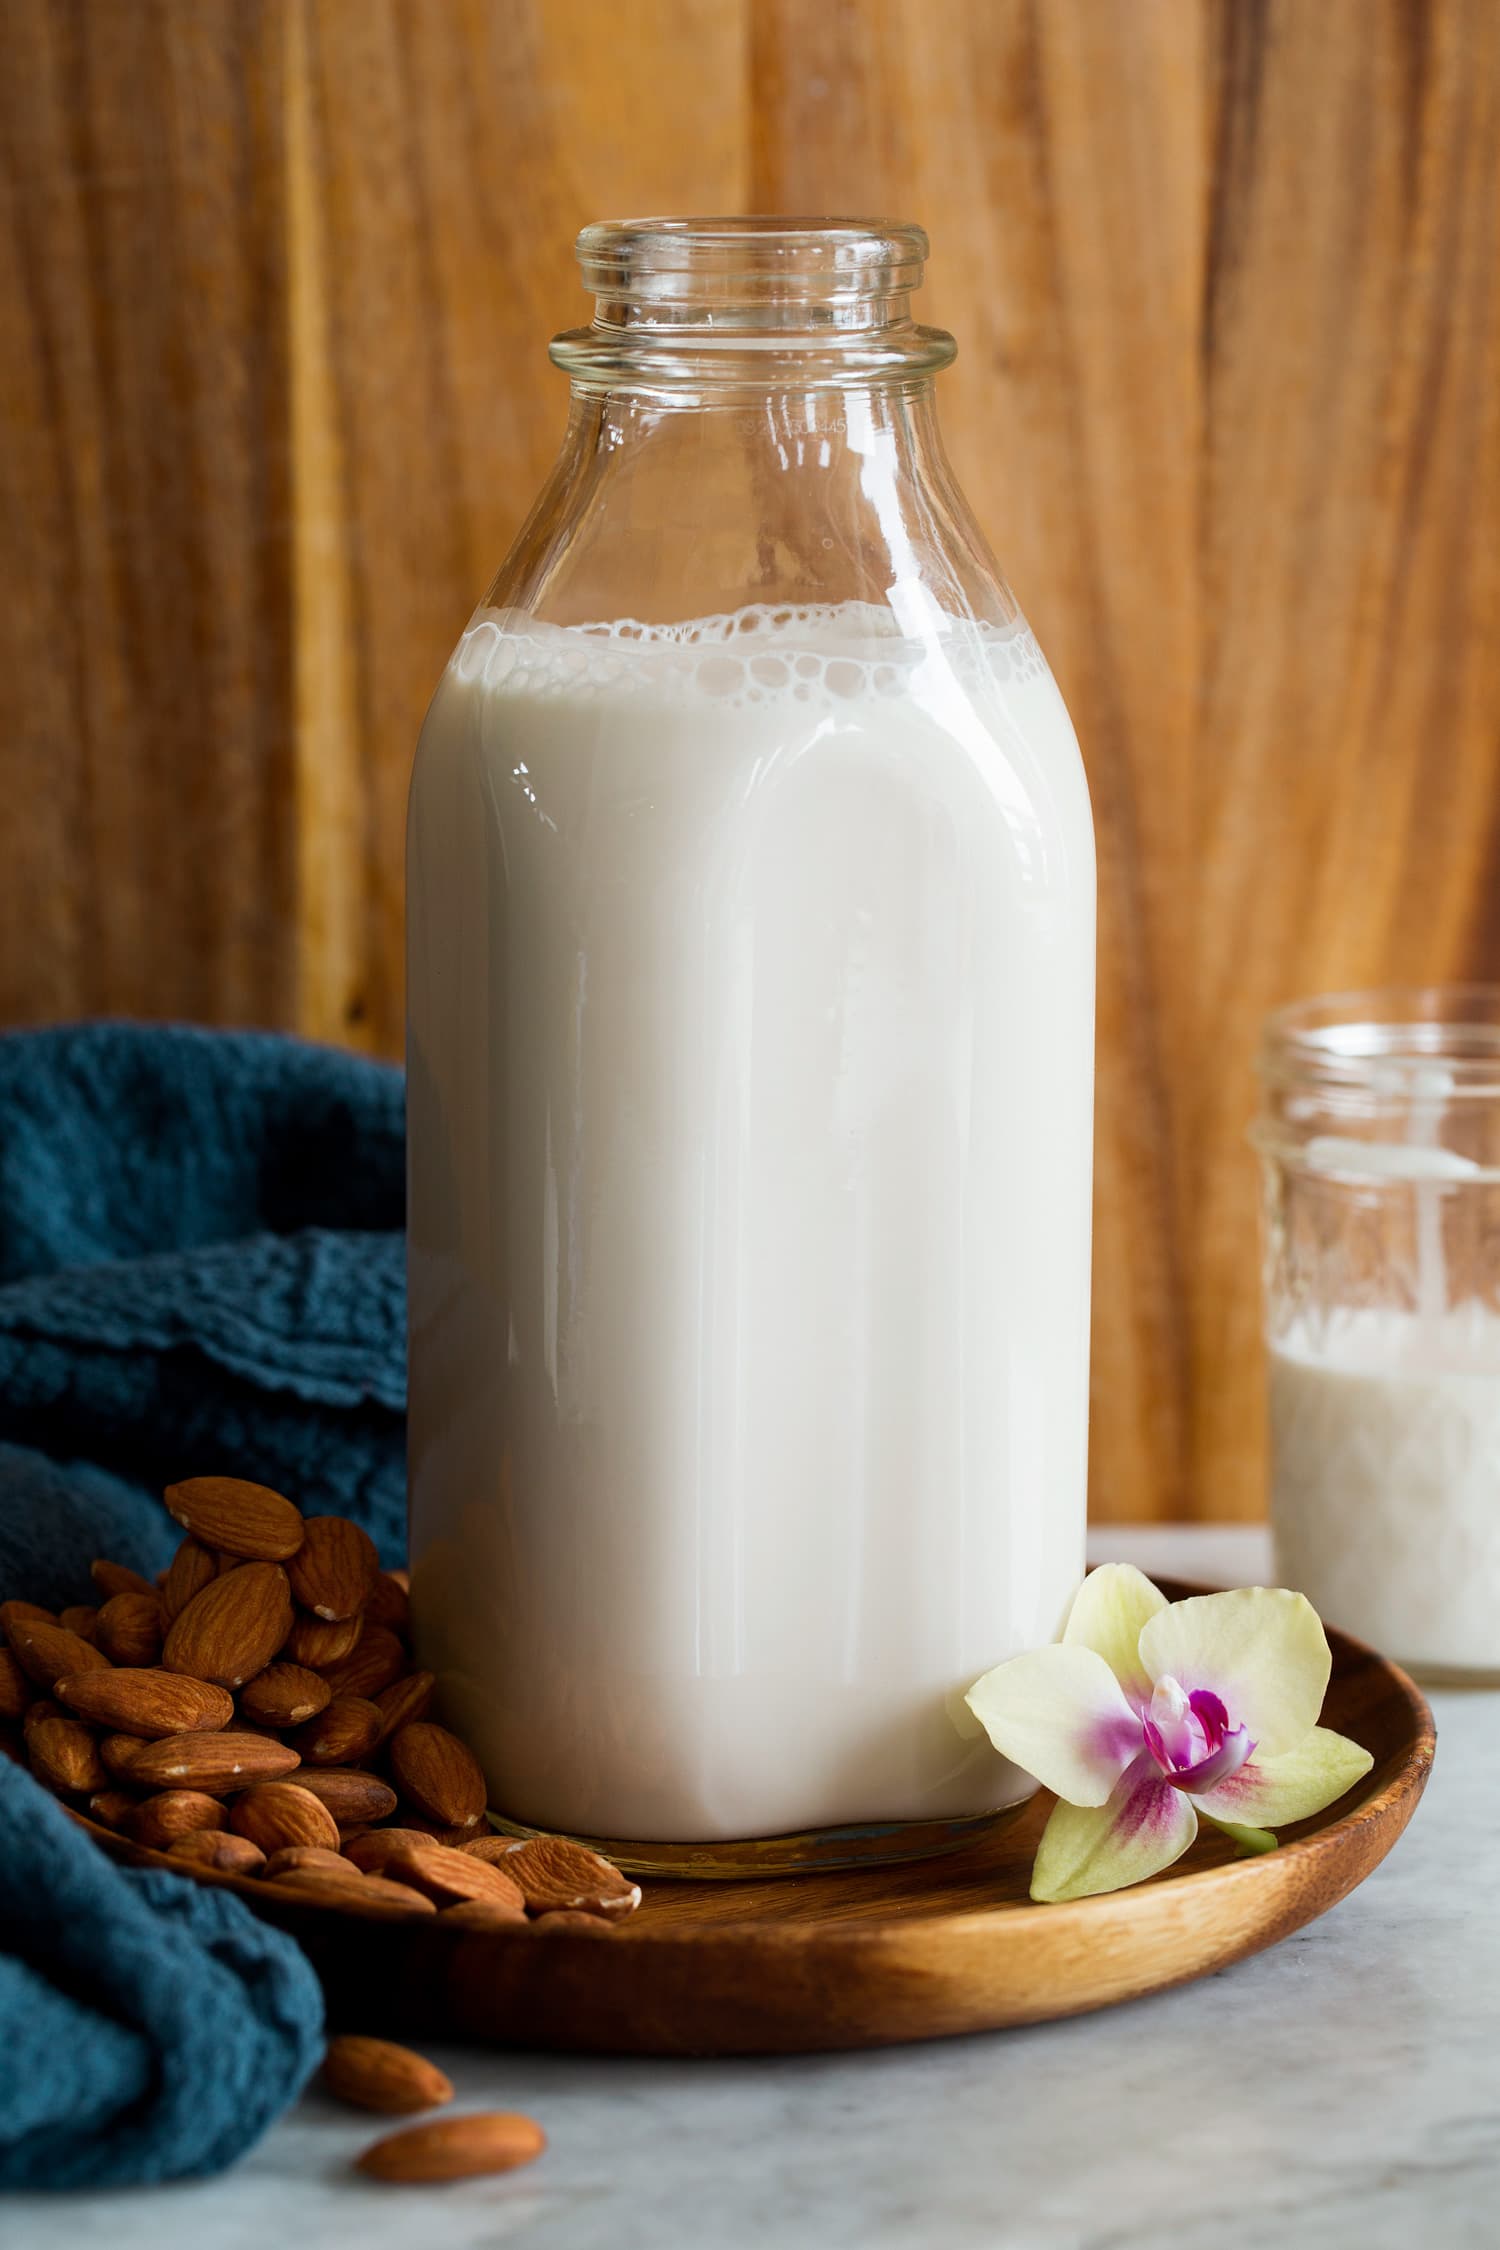 Homemade almond milk in a large glass milk pitcher.